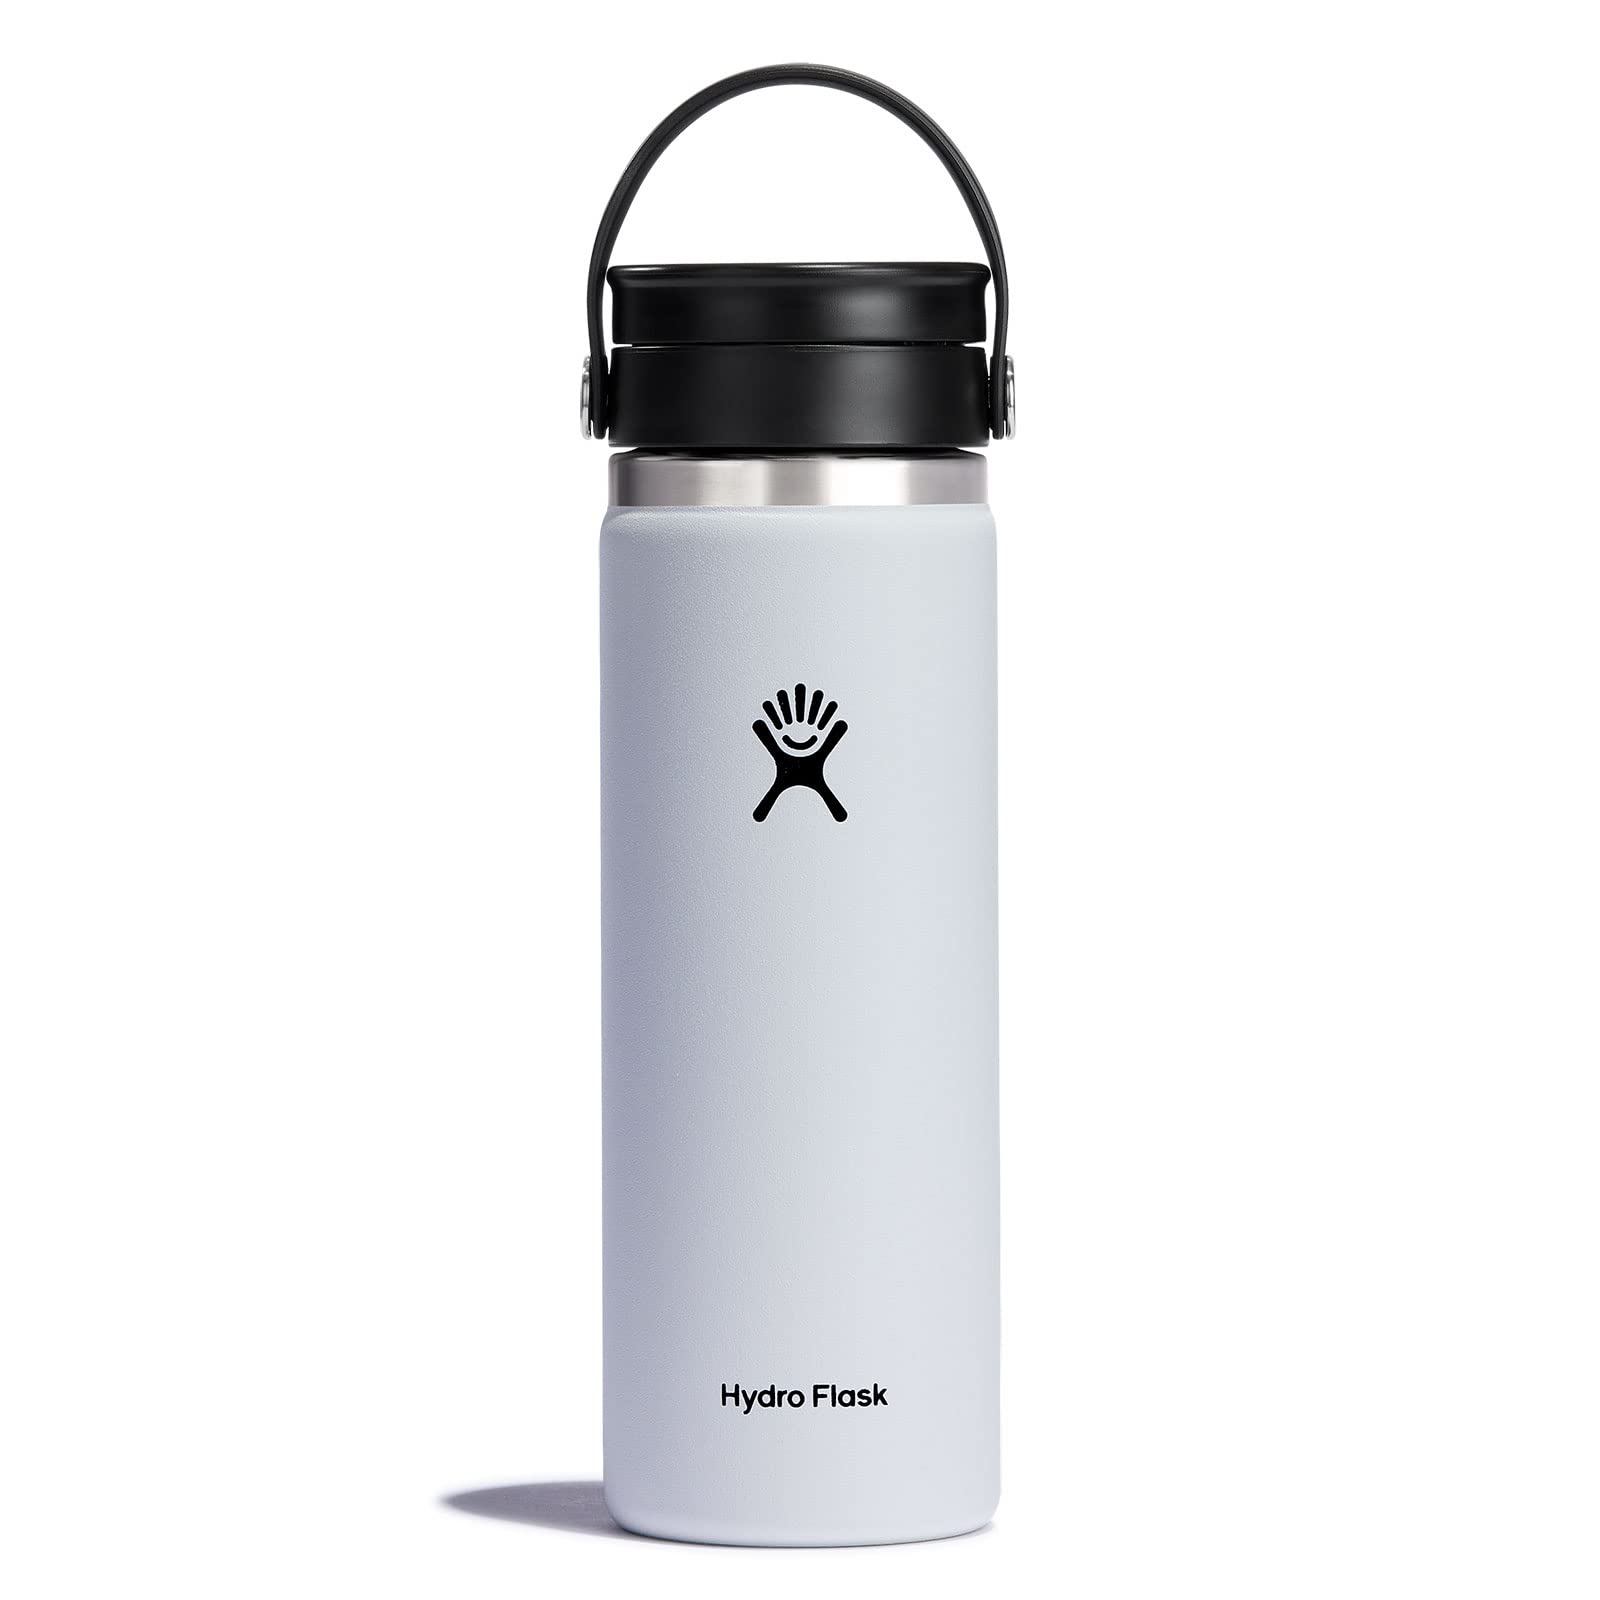 20-Oz Hydro Flask Wide Mouth Bottle w/ Flex Sip Lid (White) $14.22 + Free Shipping w/ Prime or on orders over $35